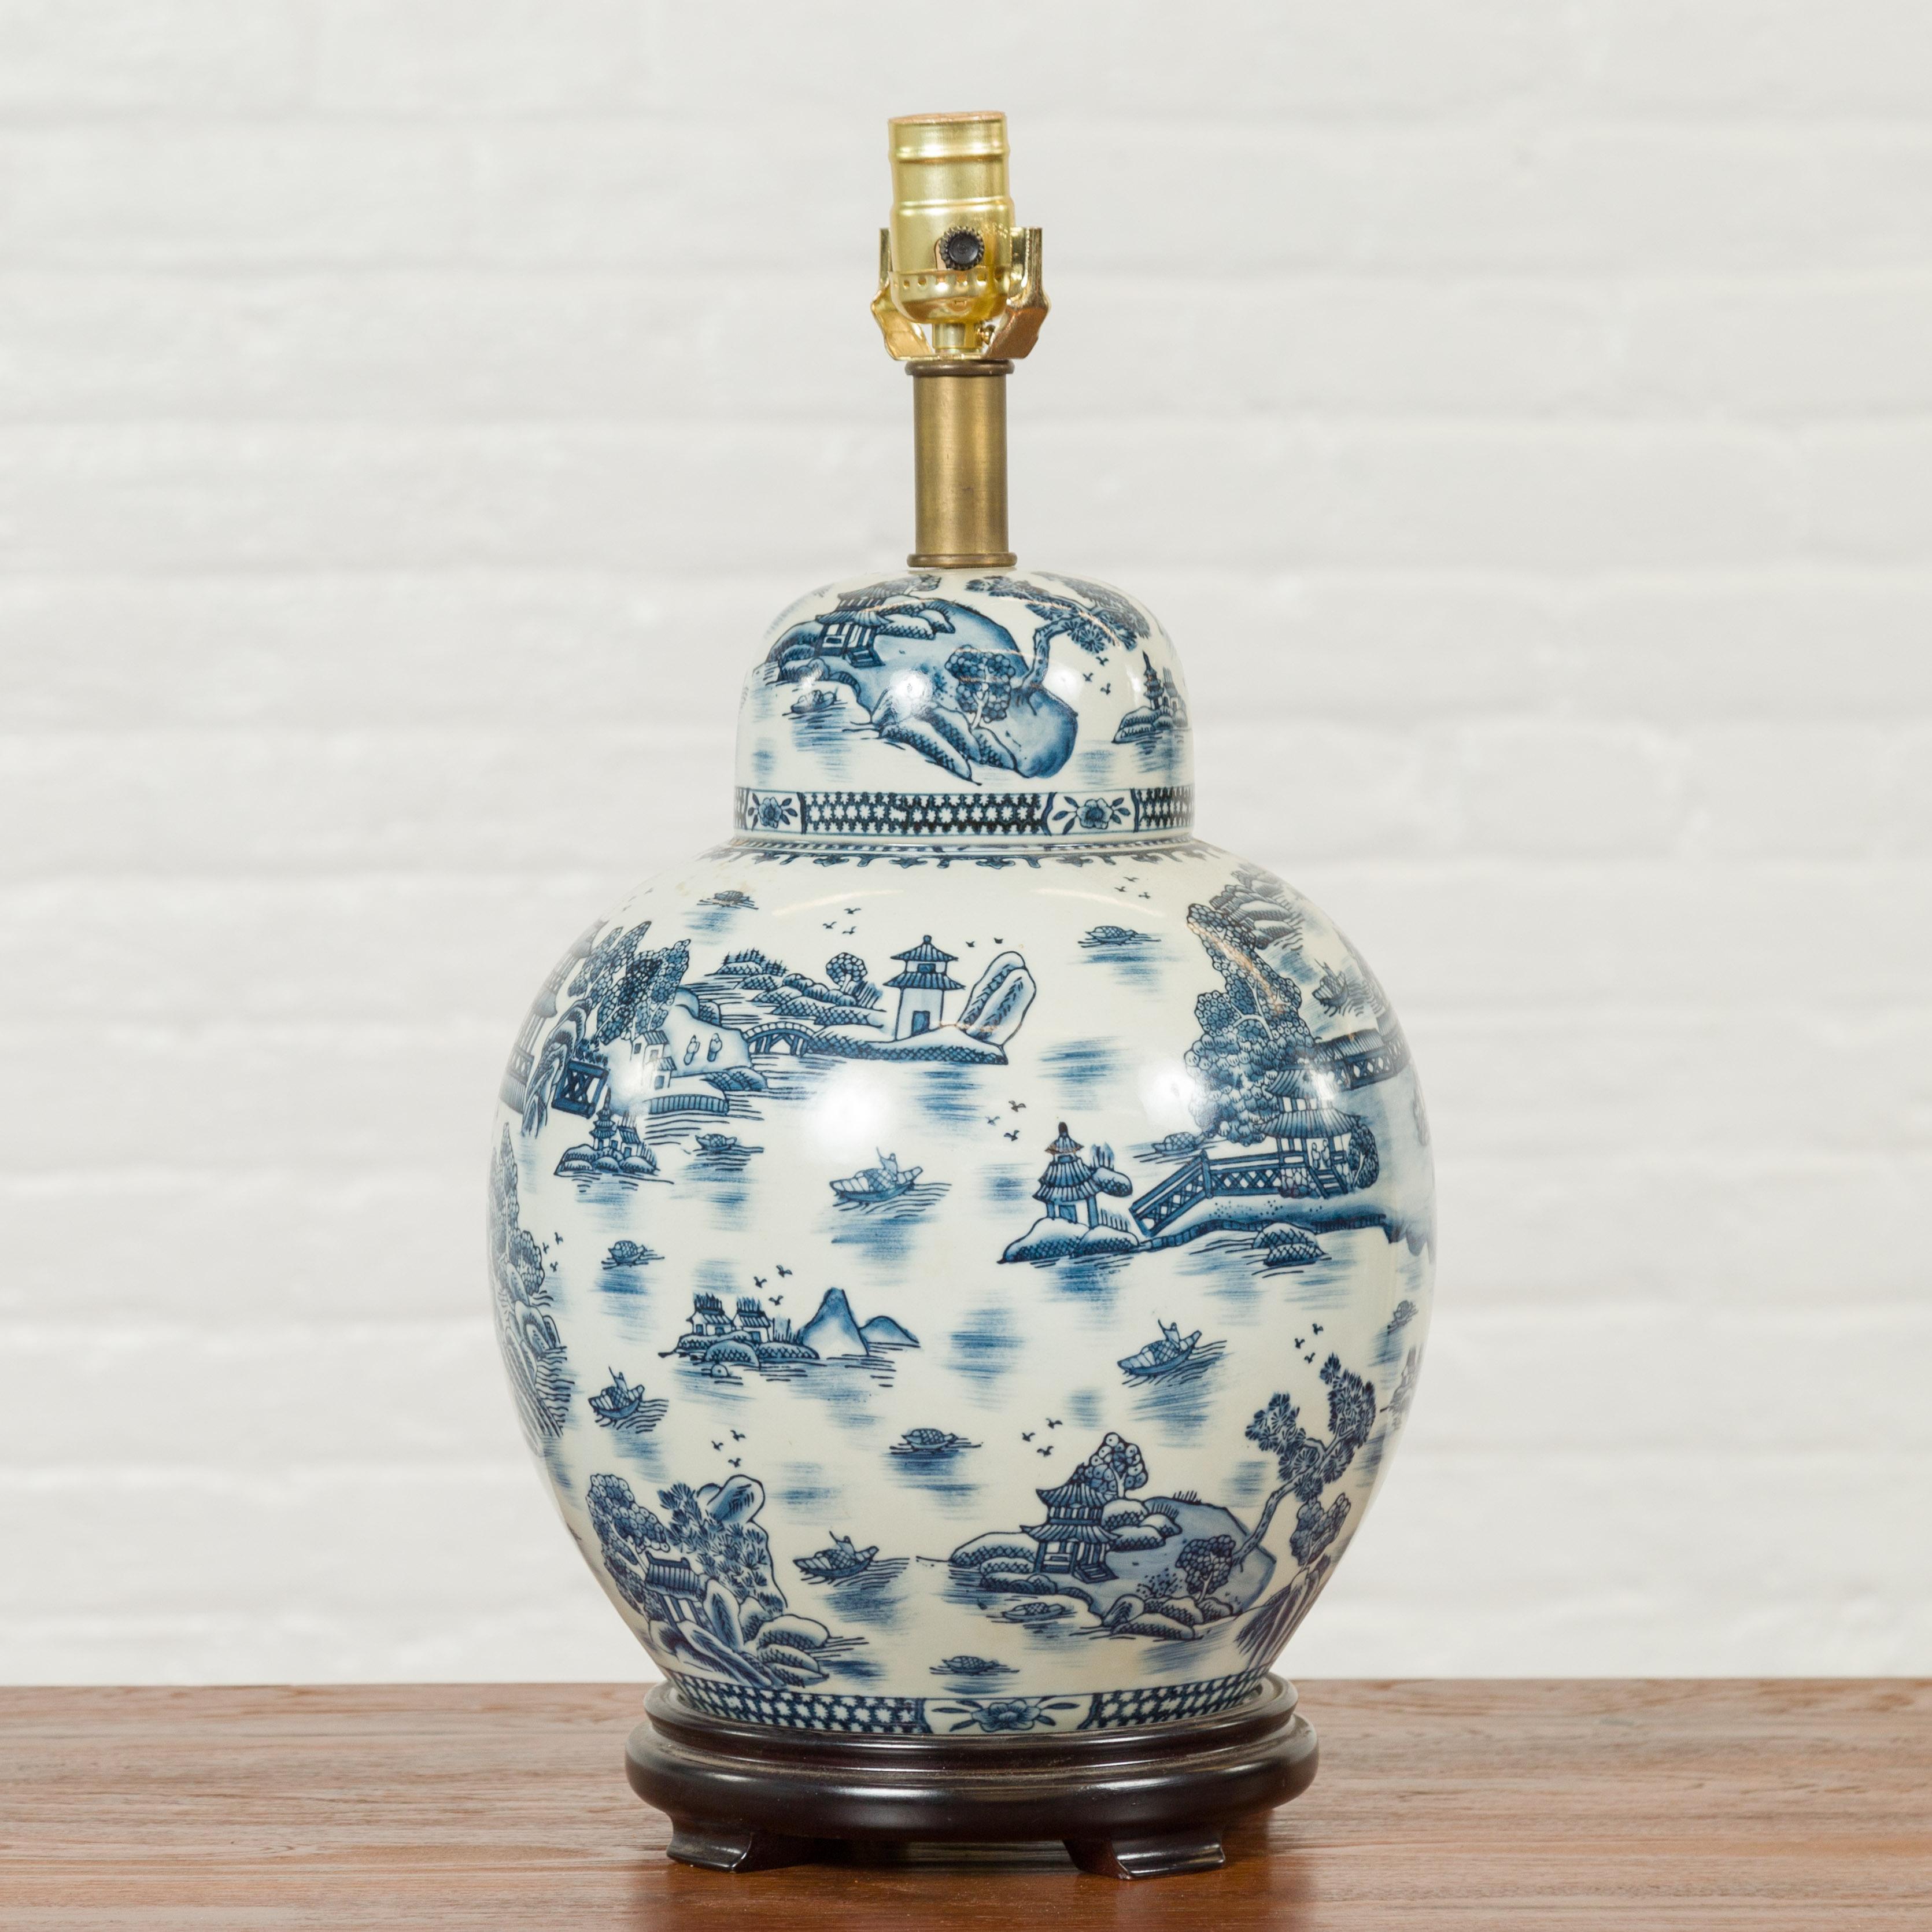 A Chinese vintage blue and white porcelain table lamp from the mid-20th century with landscape and architecture patterns. Born in China during the midcentury period, this blue and white porcelain vase has been made into a table lamp. Raised on a